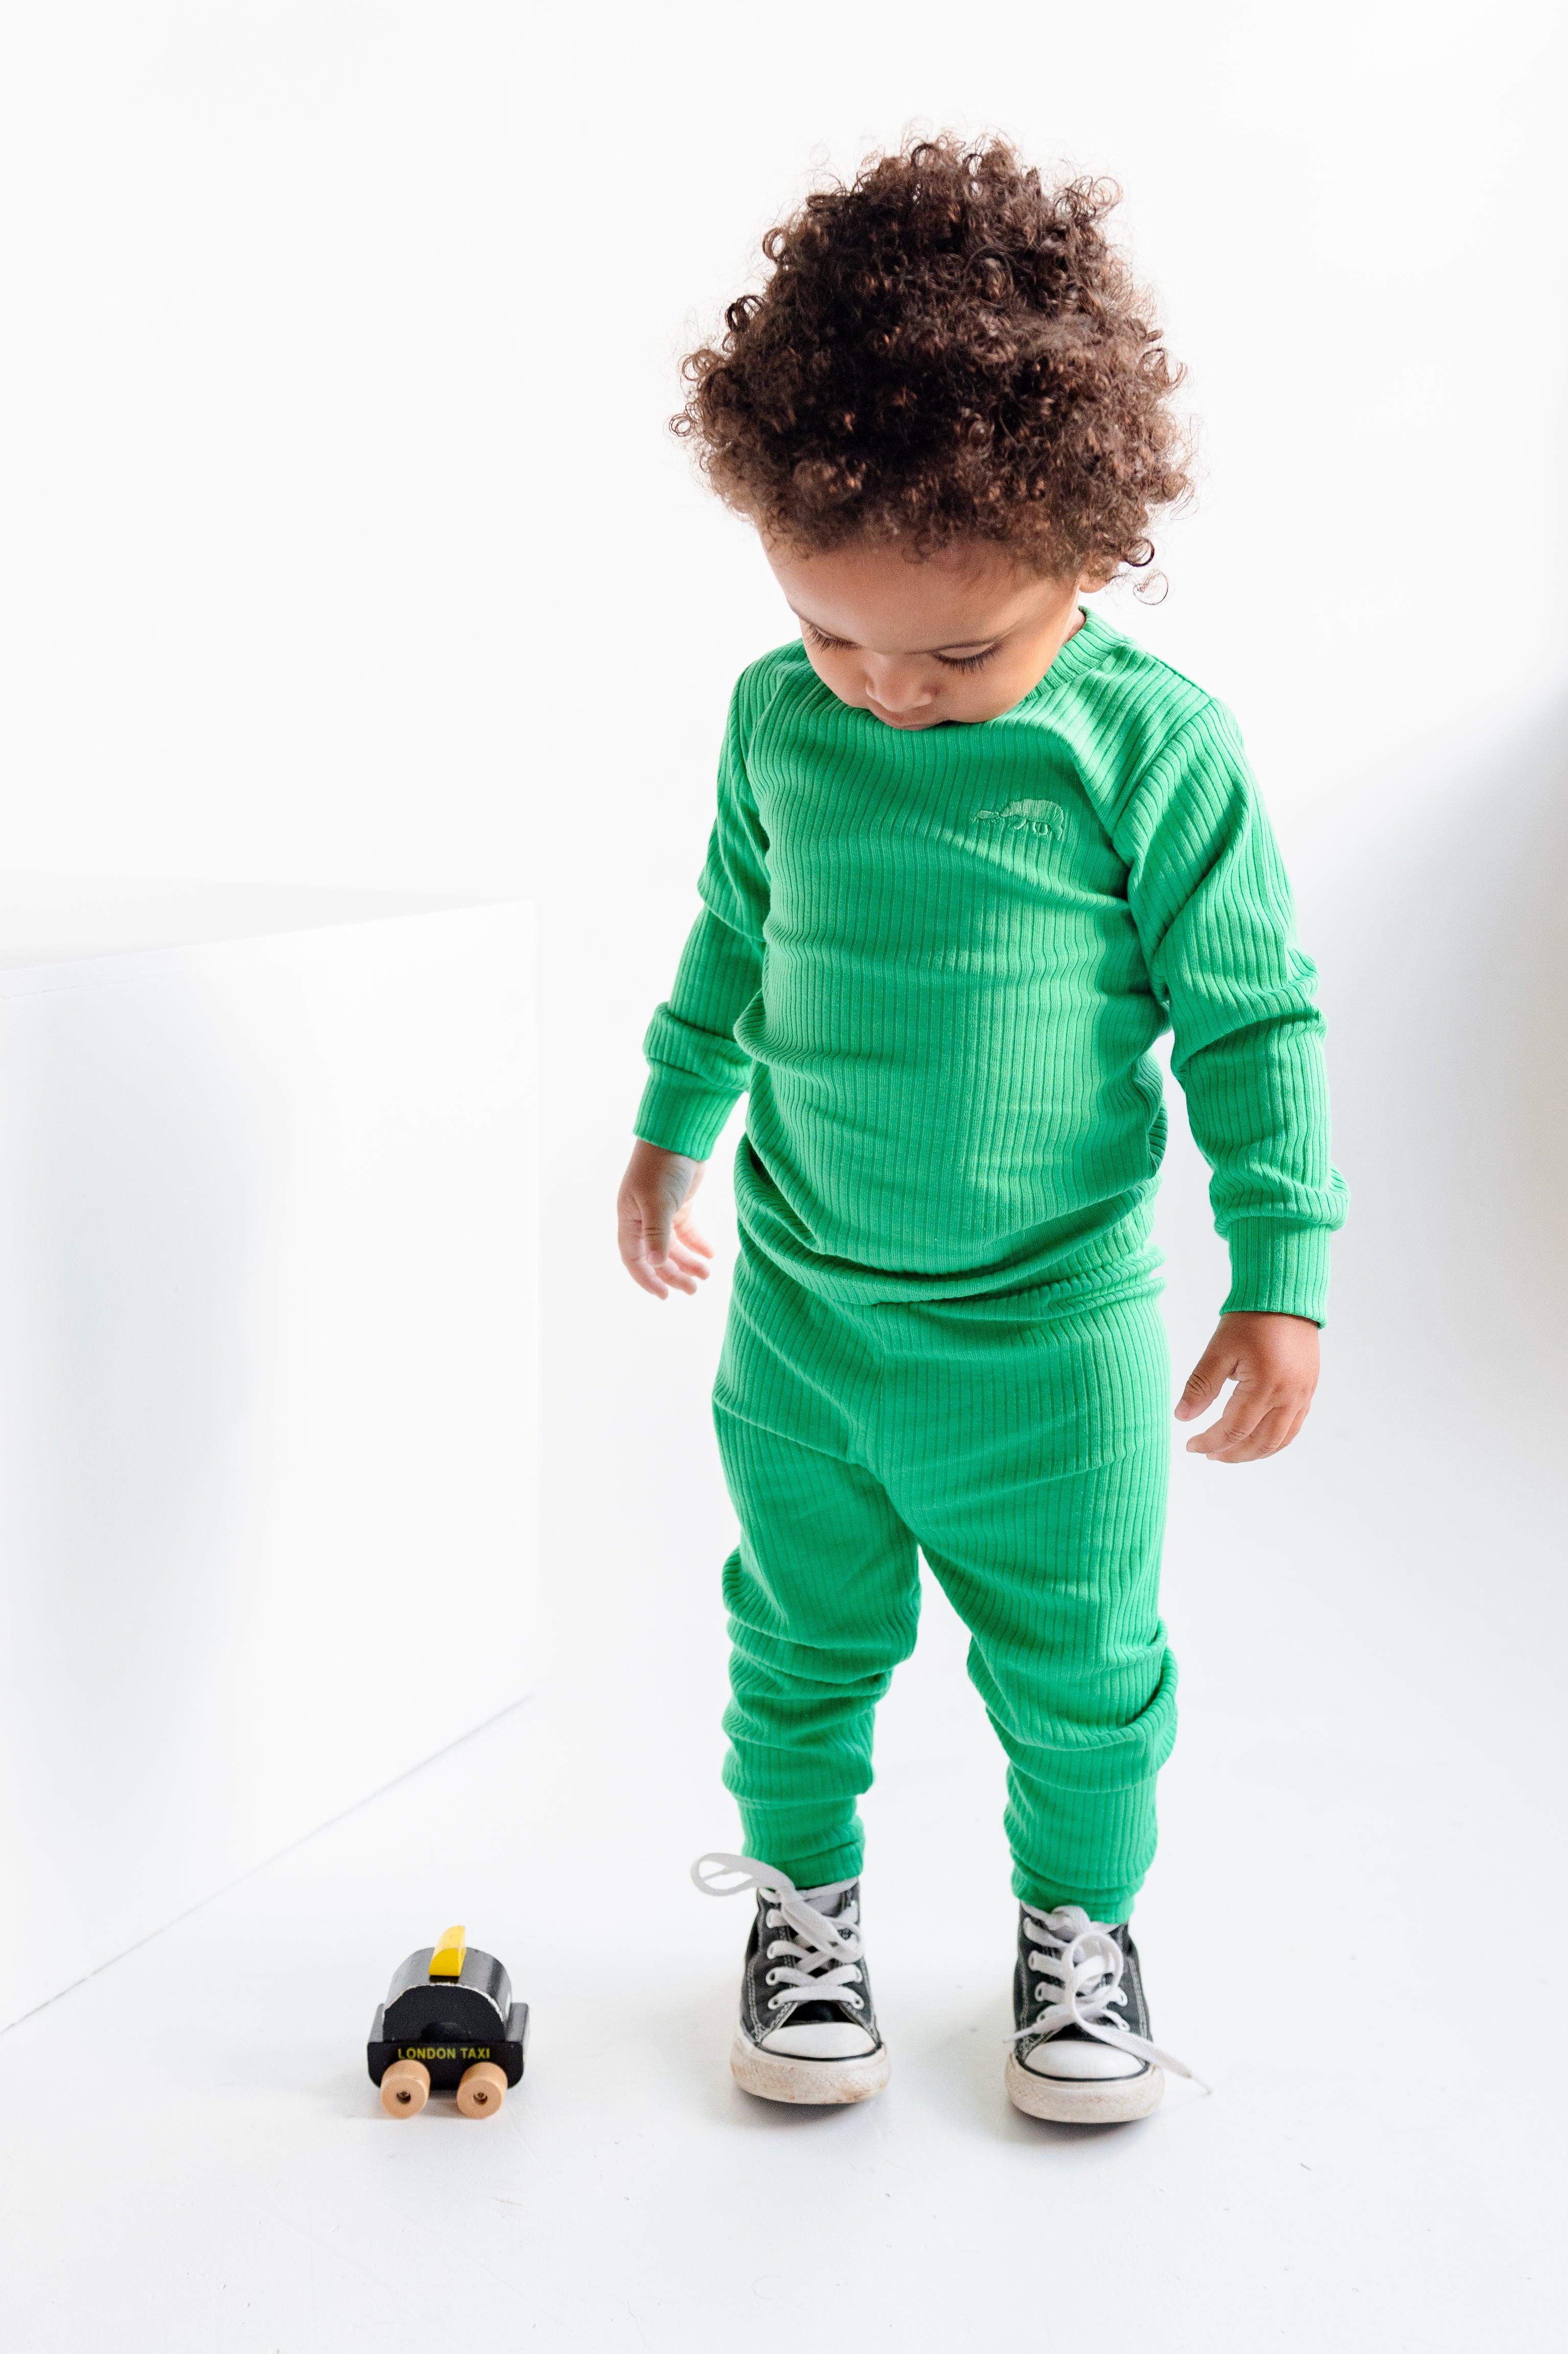 files/grass-green-ribbed-long-sleeve-top-claybearofficial-5.jpg